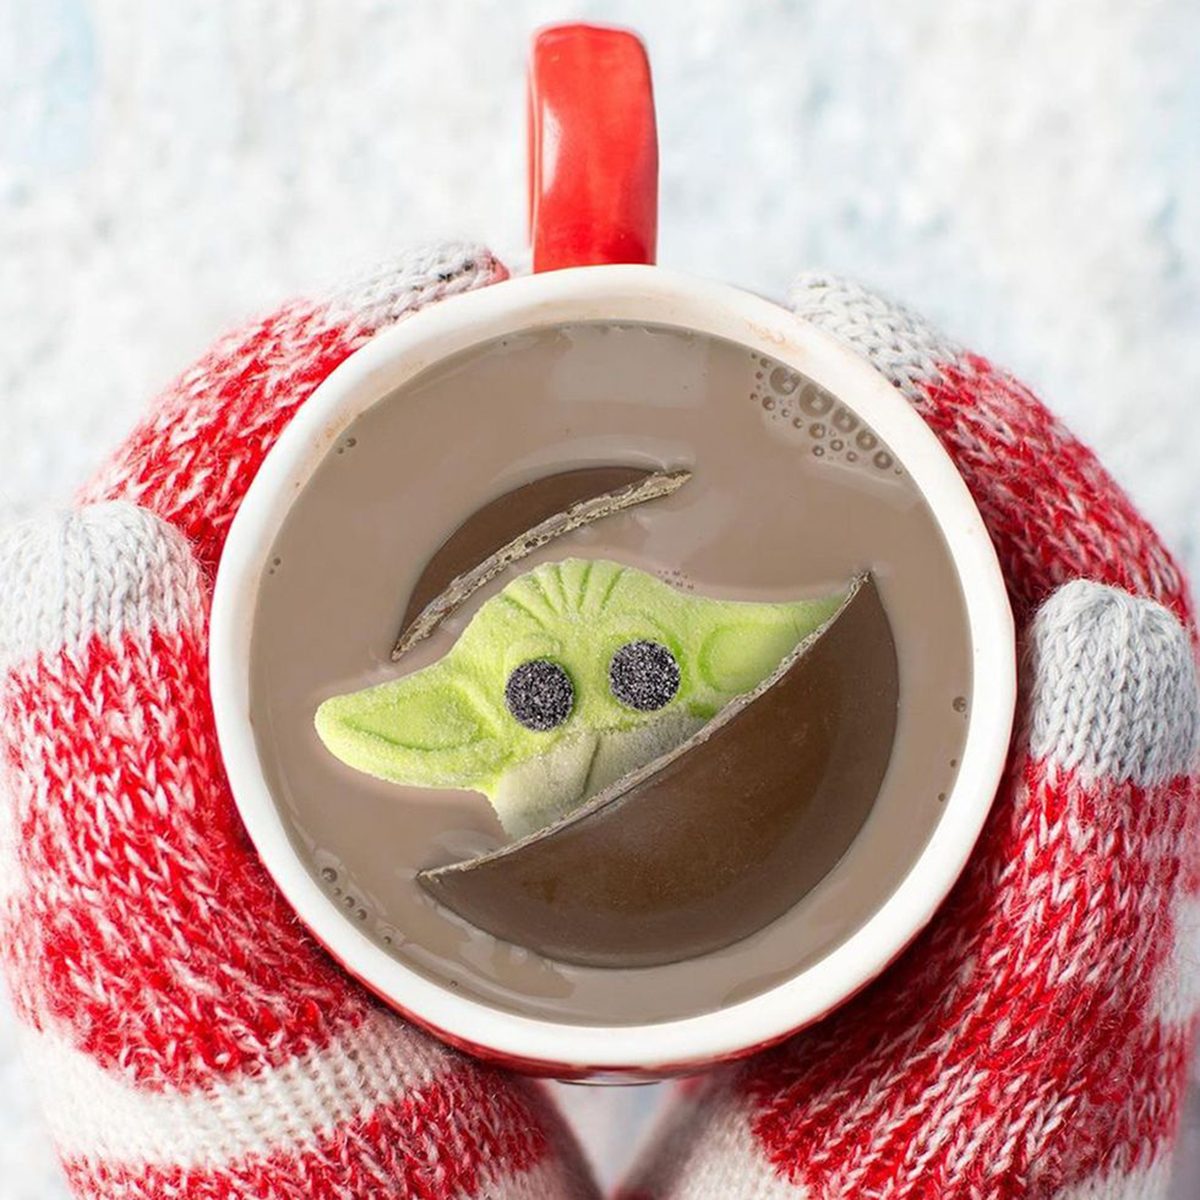 https://www.tasteofhome.com/wp-content/uploads/2020/11/galerie-star-wars-the-mandalorian-the-child-holiday-milk-chocolate-with-marshmallow-hot-cocoa-bomb.jpg?fit=680%2C680